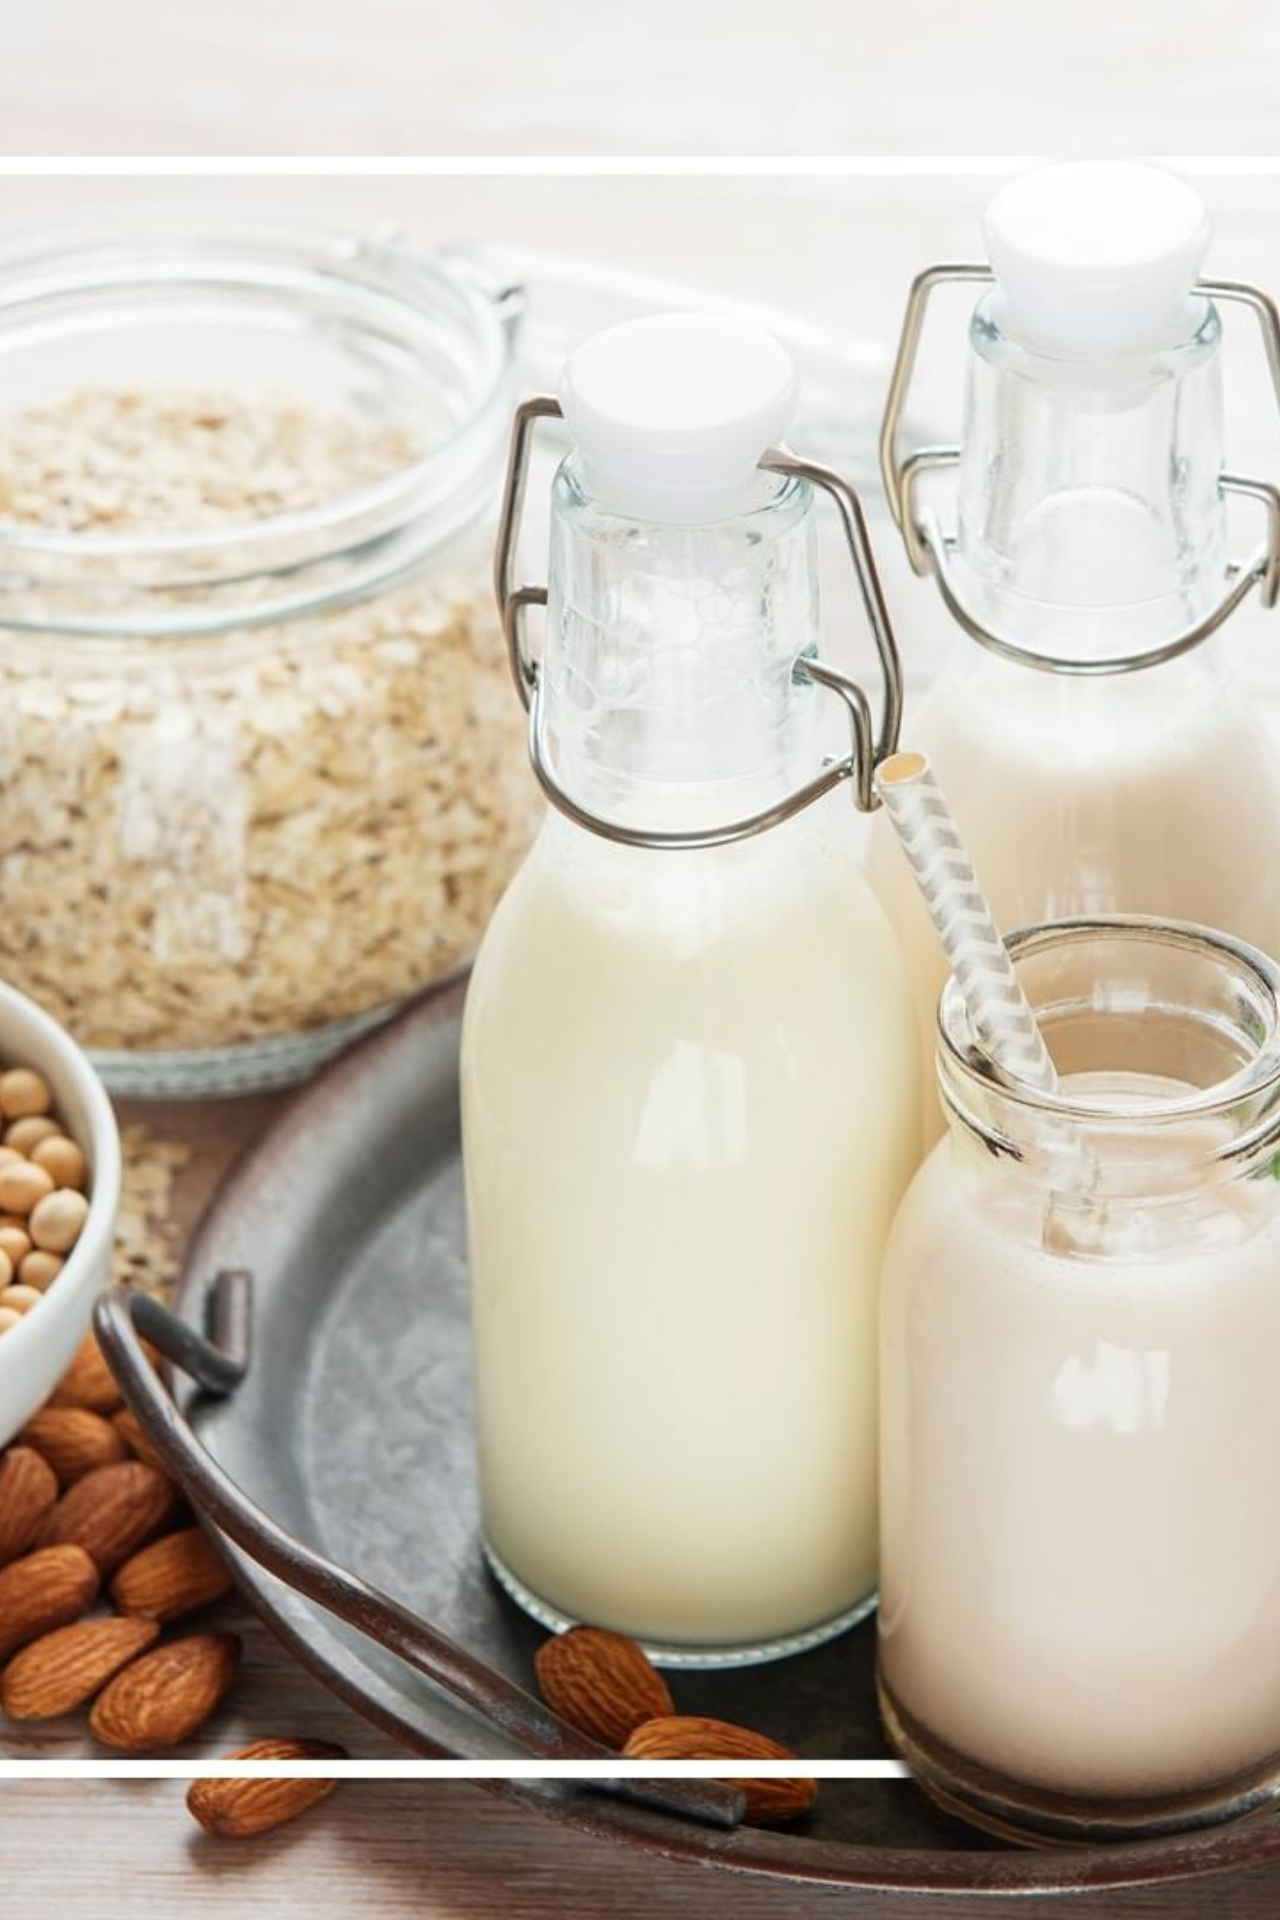 6 Plant-based milk products that are substitutes for dairy